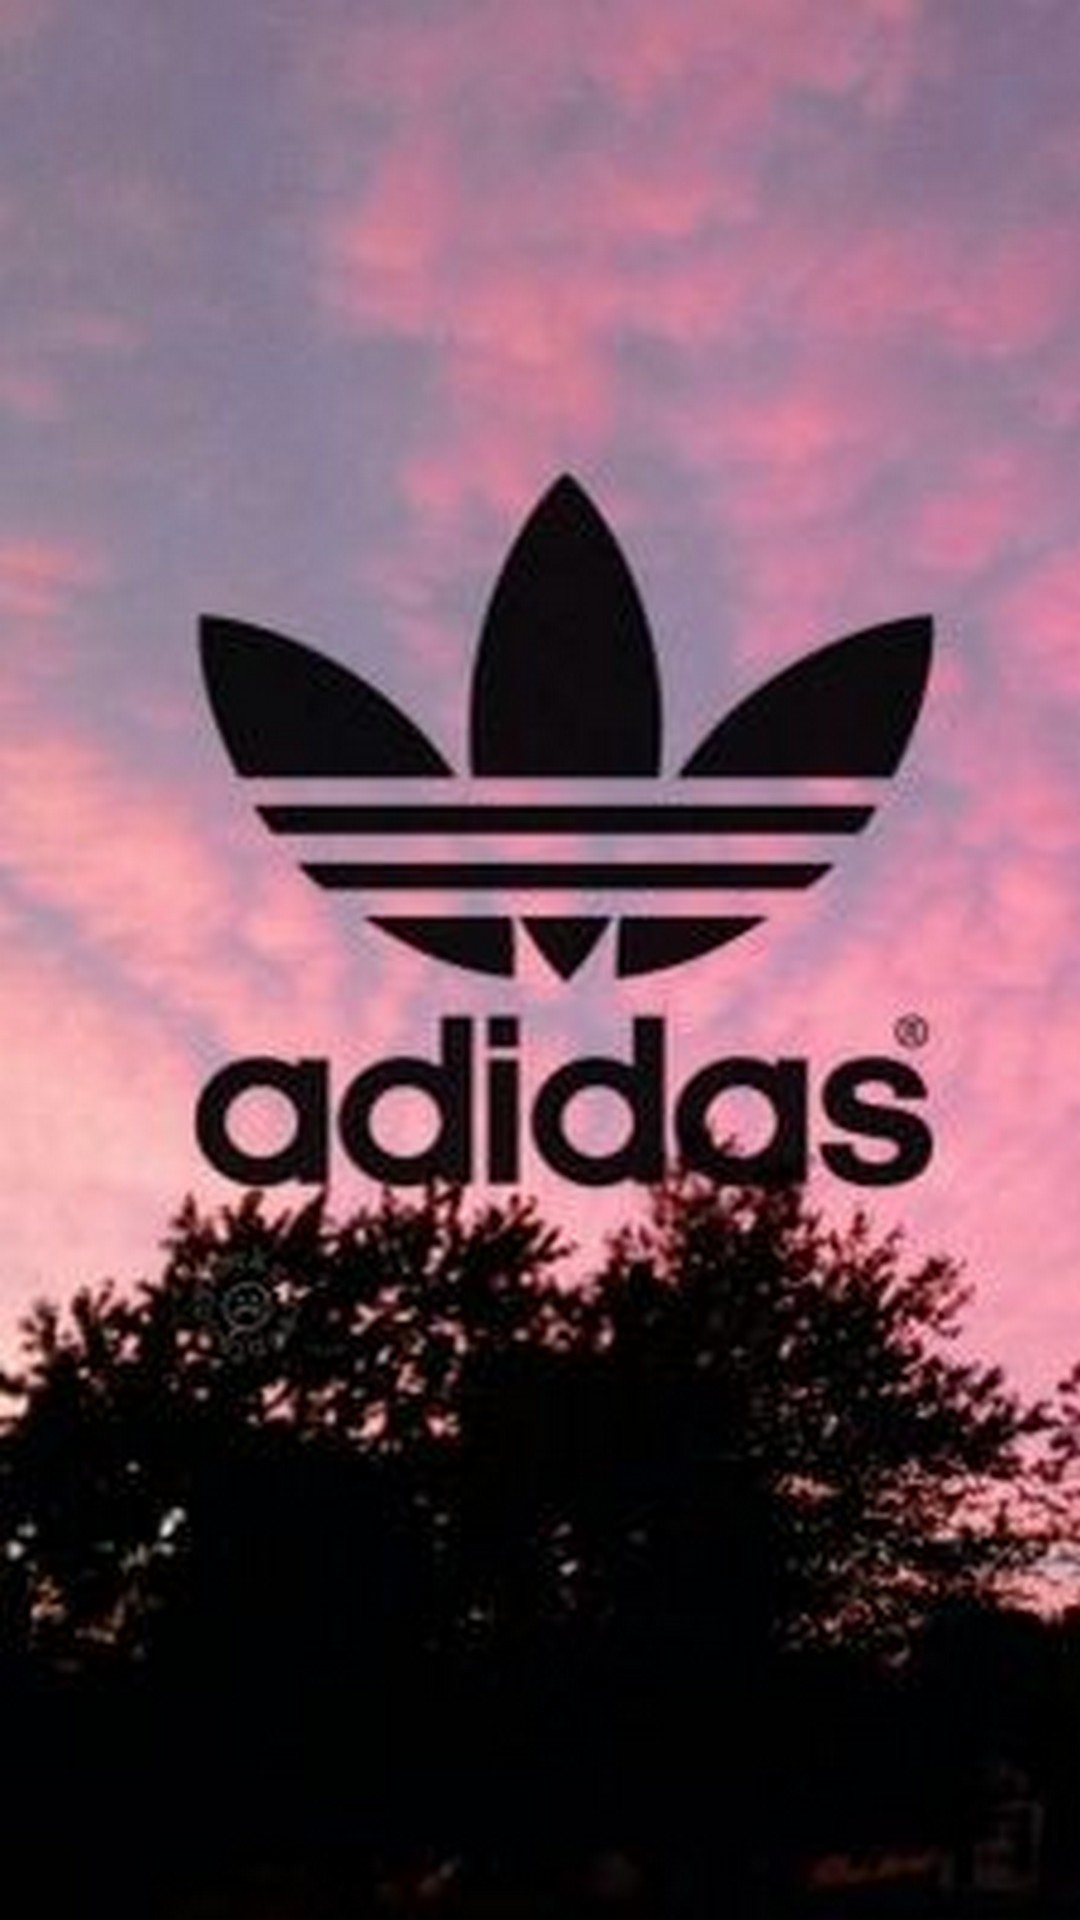 Adidas iPhone Wallpaper Home Screen with high-resolution 1080x1920 pixel. You can set as wallpaper for Apple iPhone X, XS Max, XR, 8, 7, 6, SE, iPad. Enjoy and share your favorite HD wallpapers and background images